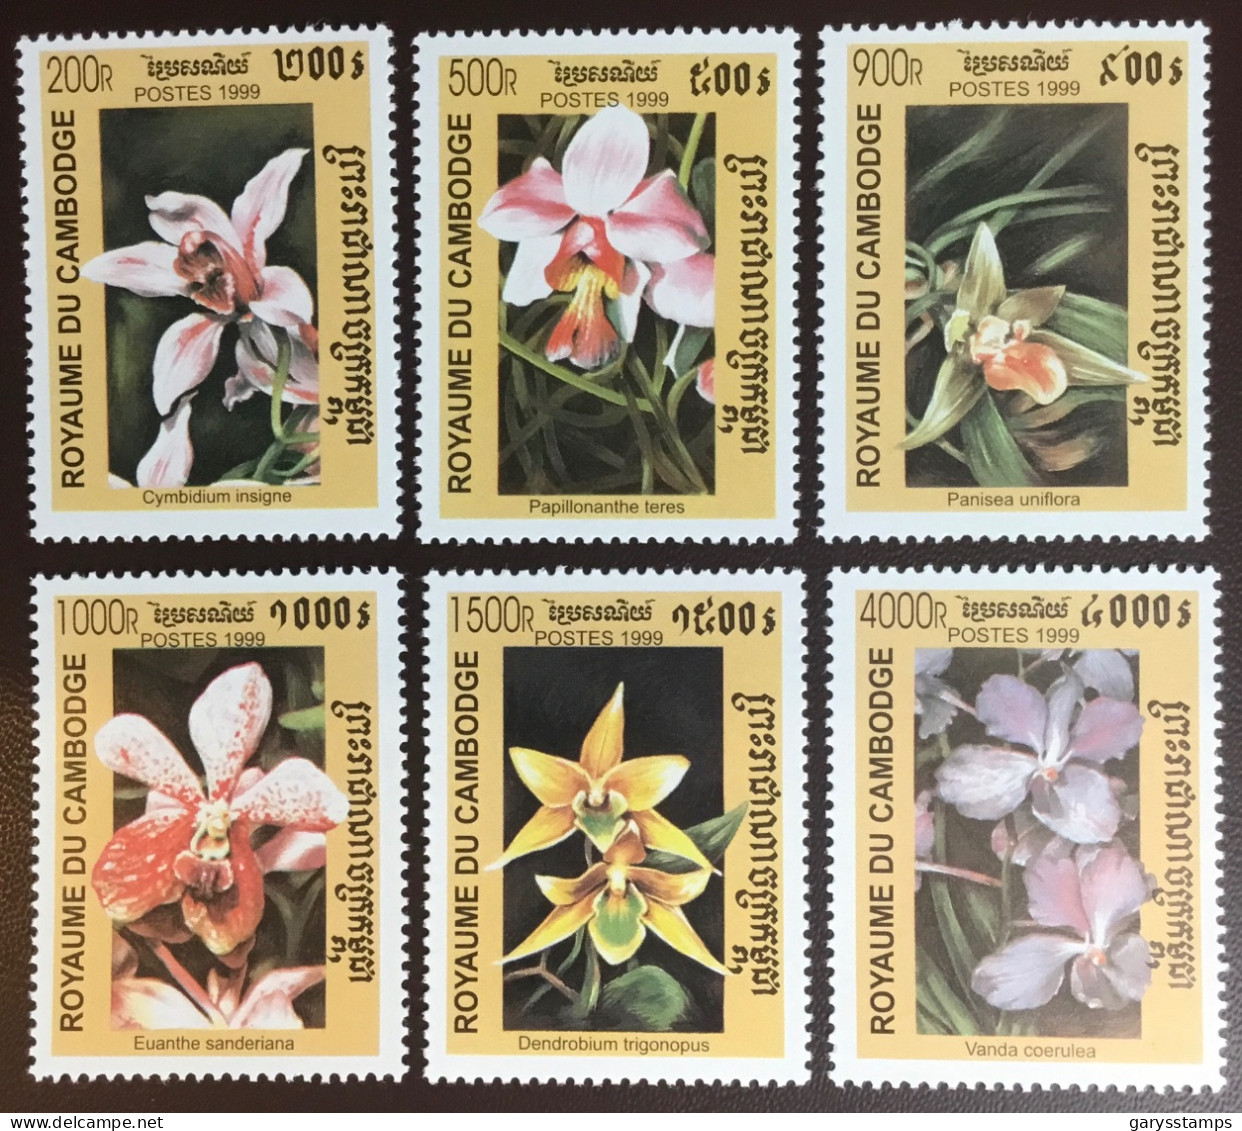 Cambodia 1999 Orchids Flowers MNH - Orchids